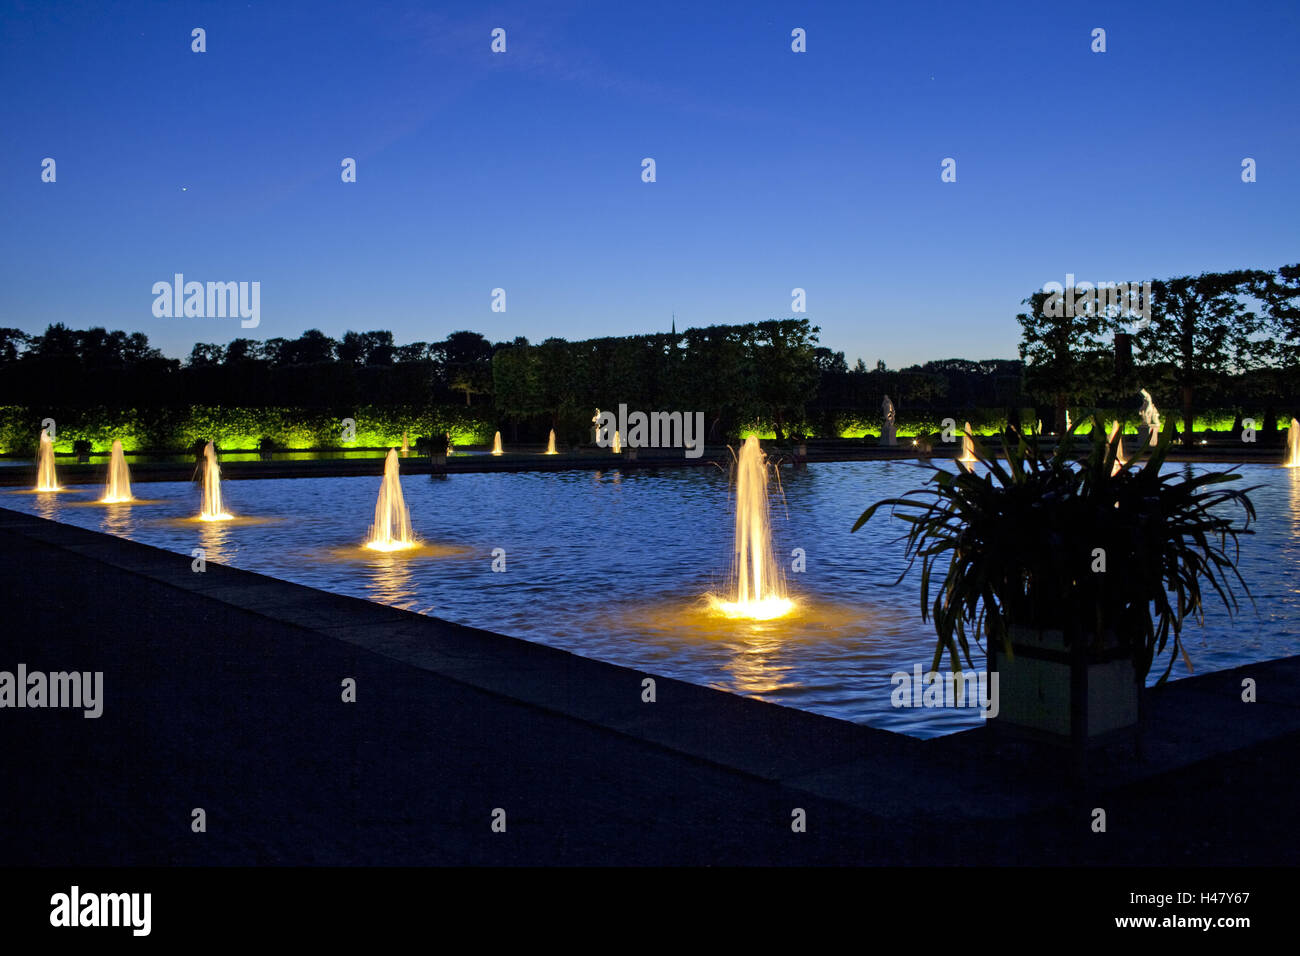 Germany, Lower Saxony, Hannover, mansions gardens light feast, night, Stock Photo